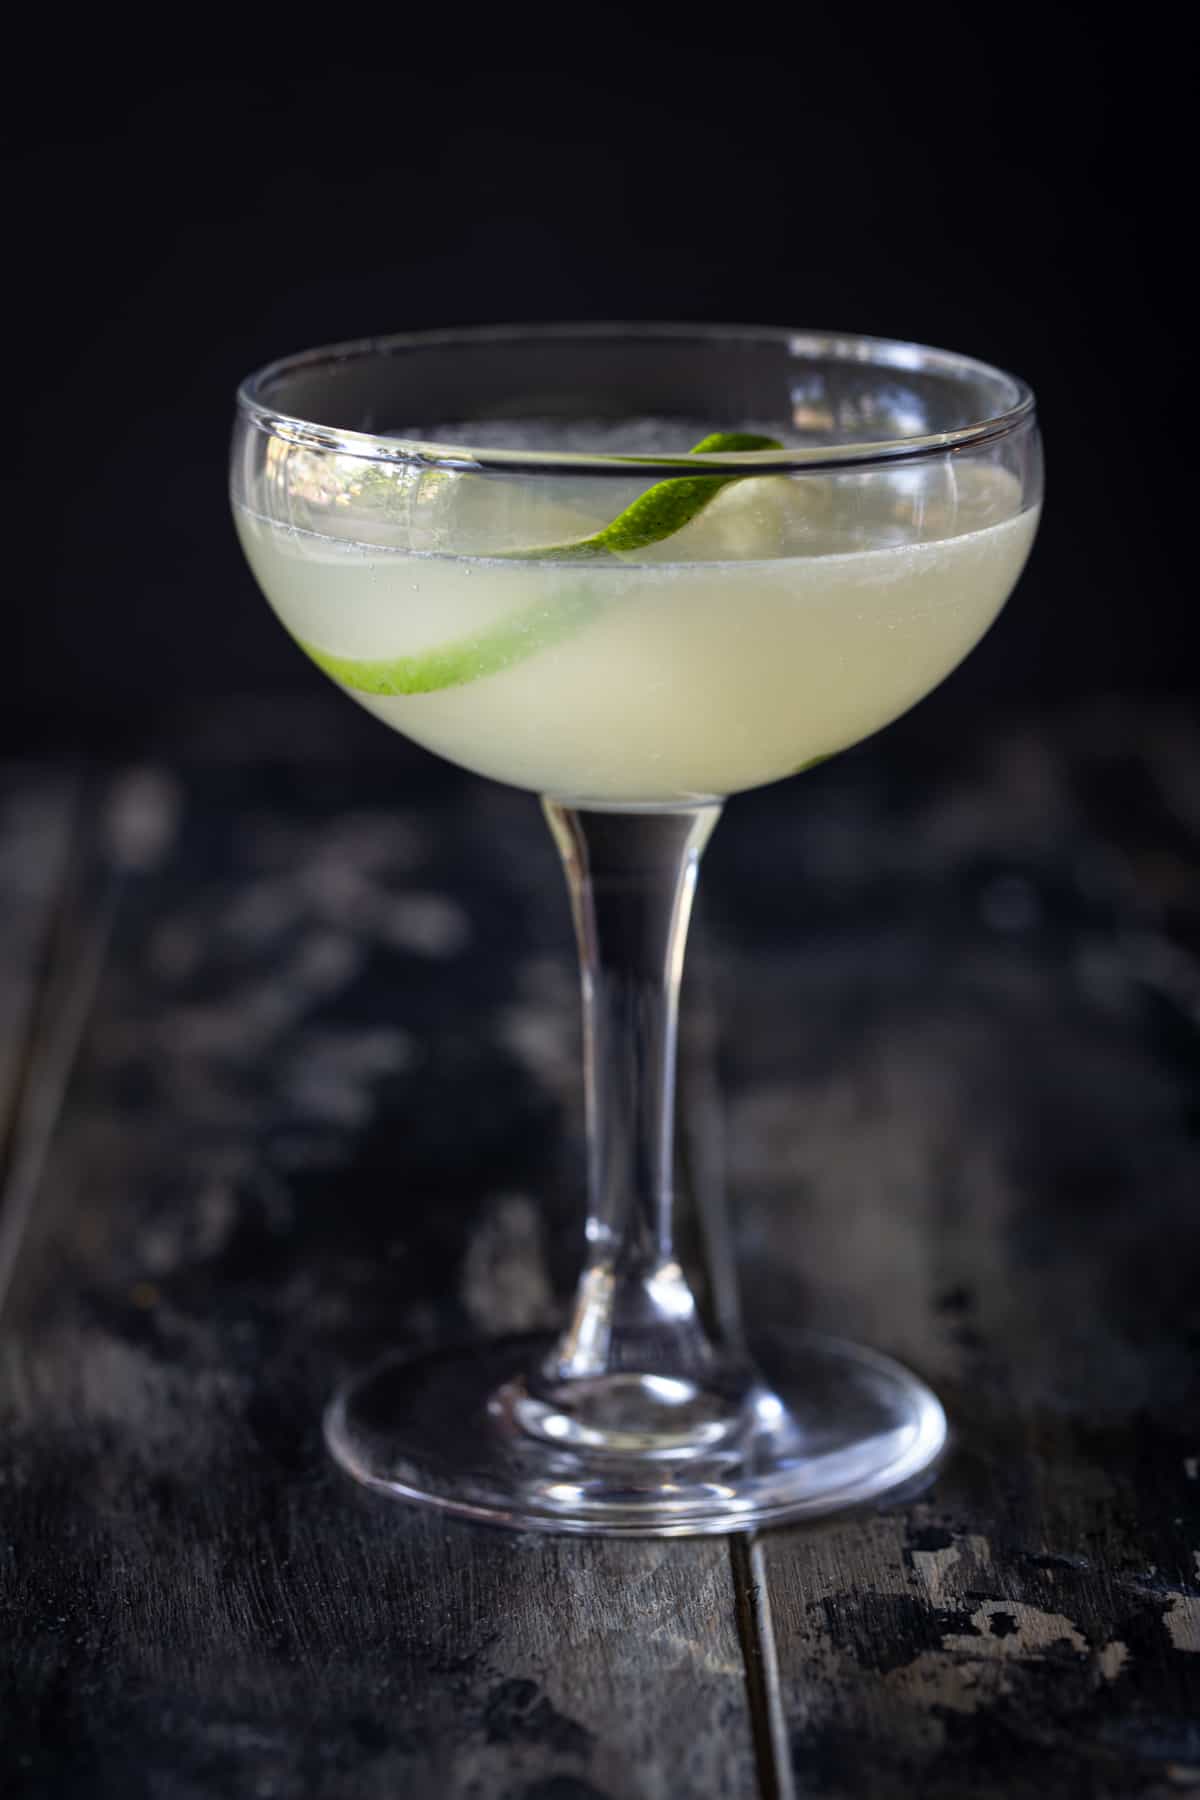 A close up of a coupe glass, with Daiquiri and Lime.